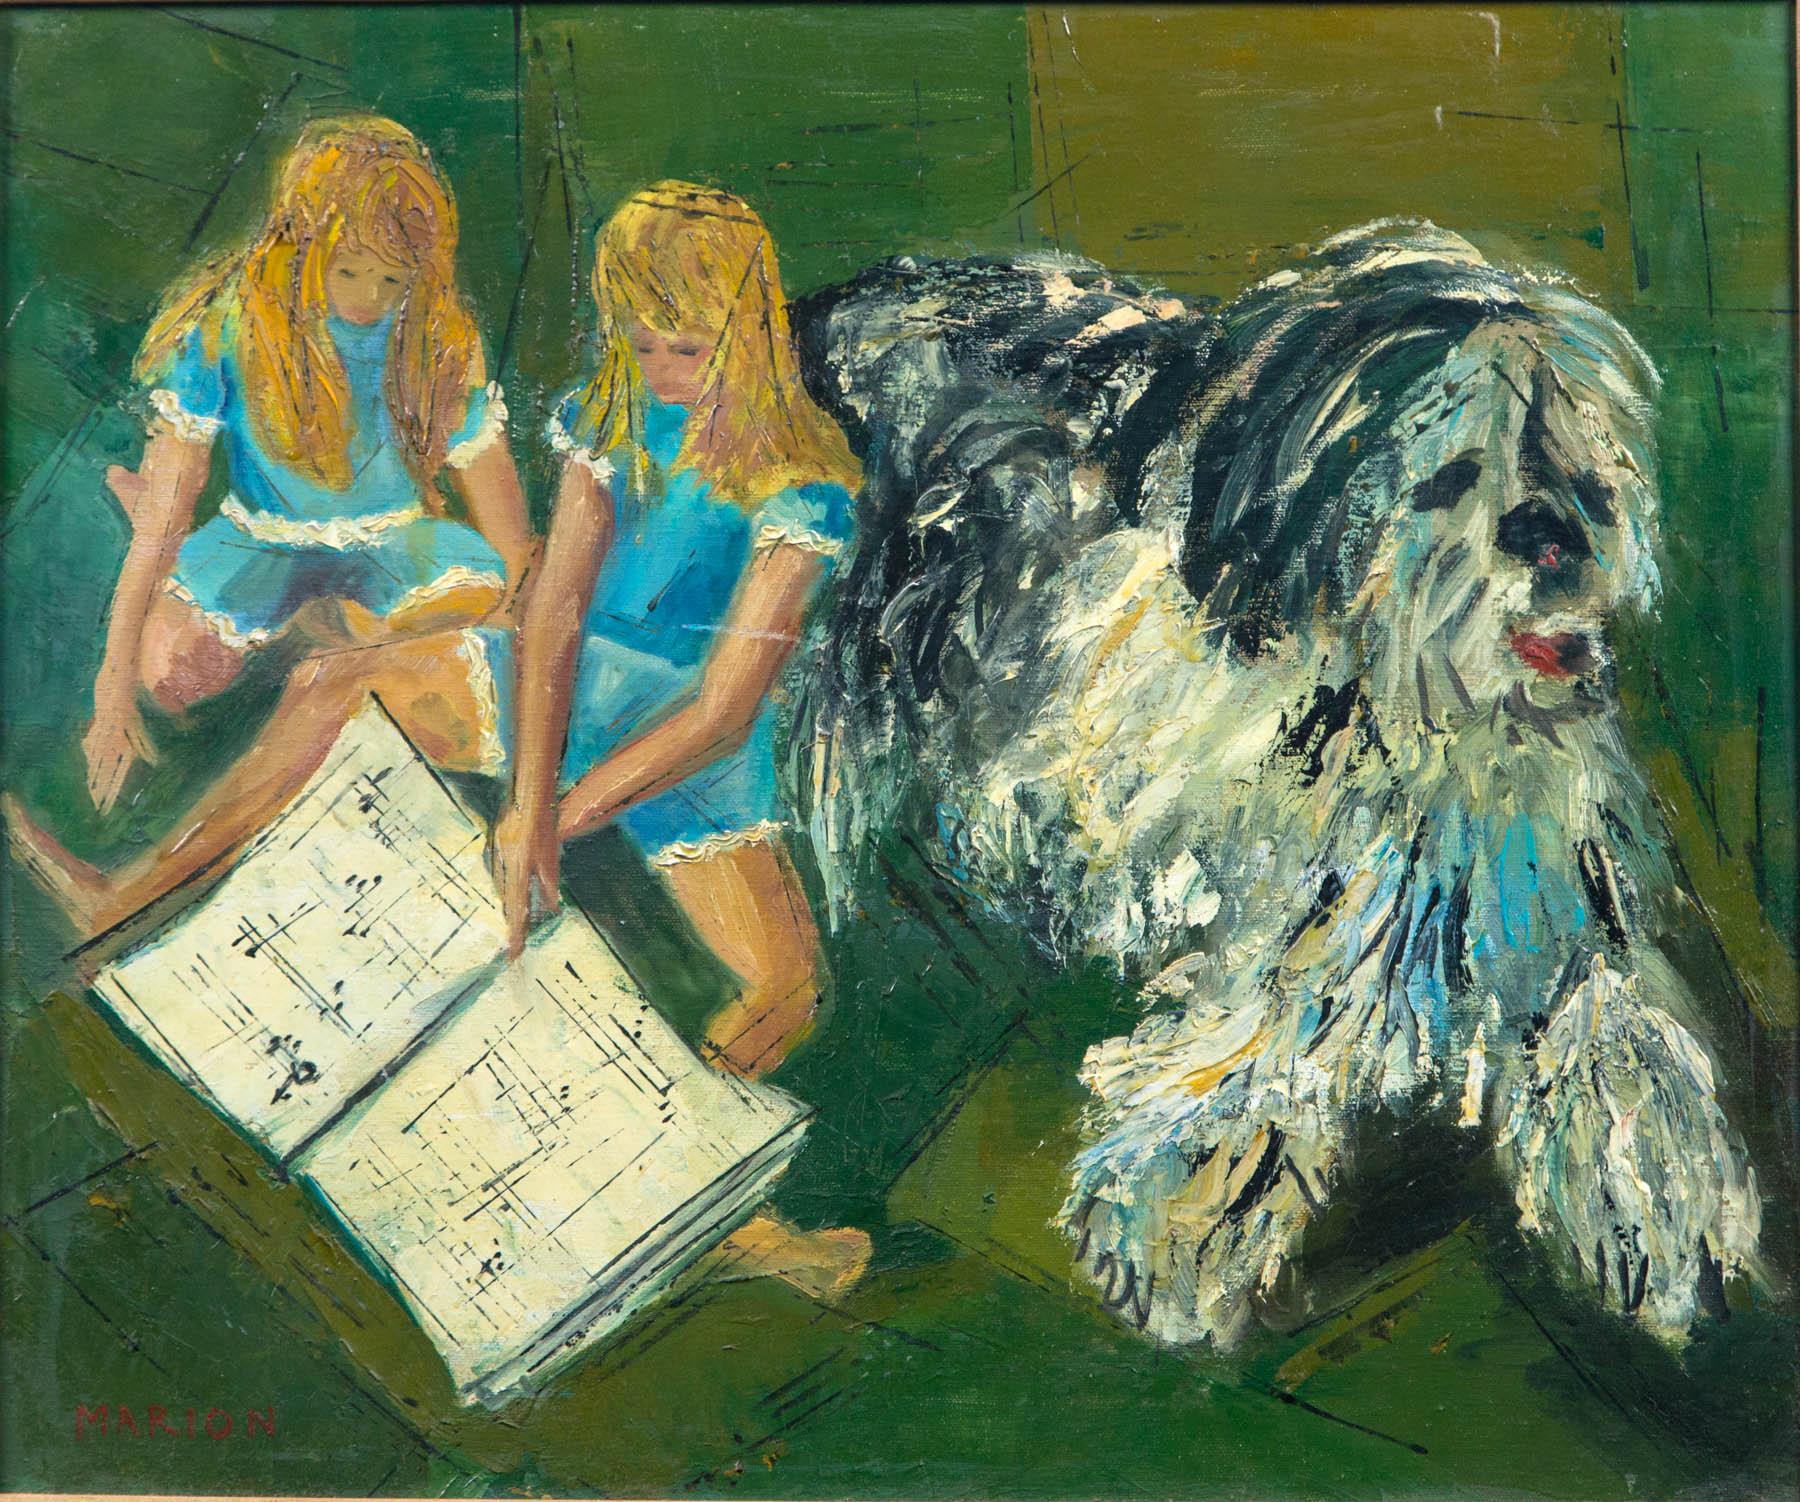 Marion Green oil painting of two blonde girls with a large shaggy dog. Without frame: 23.5 wide x 19.5 high.
A few marks on the frame.